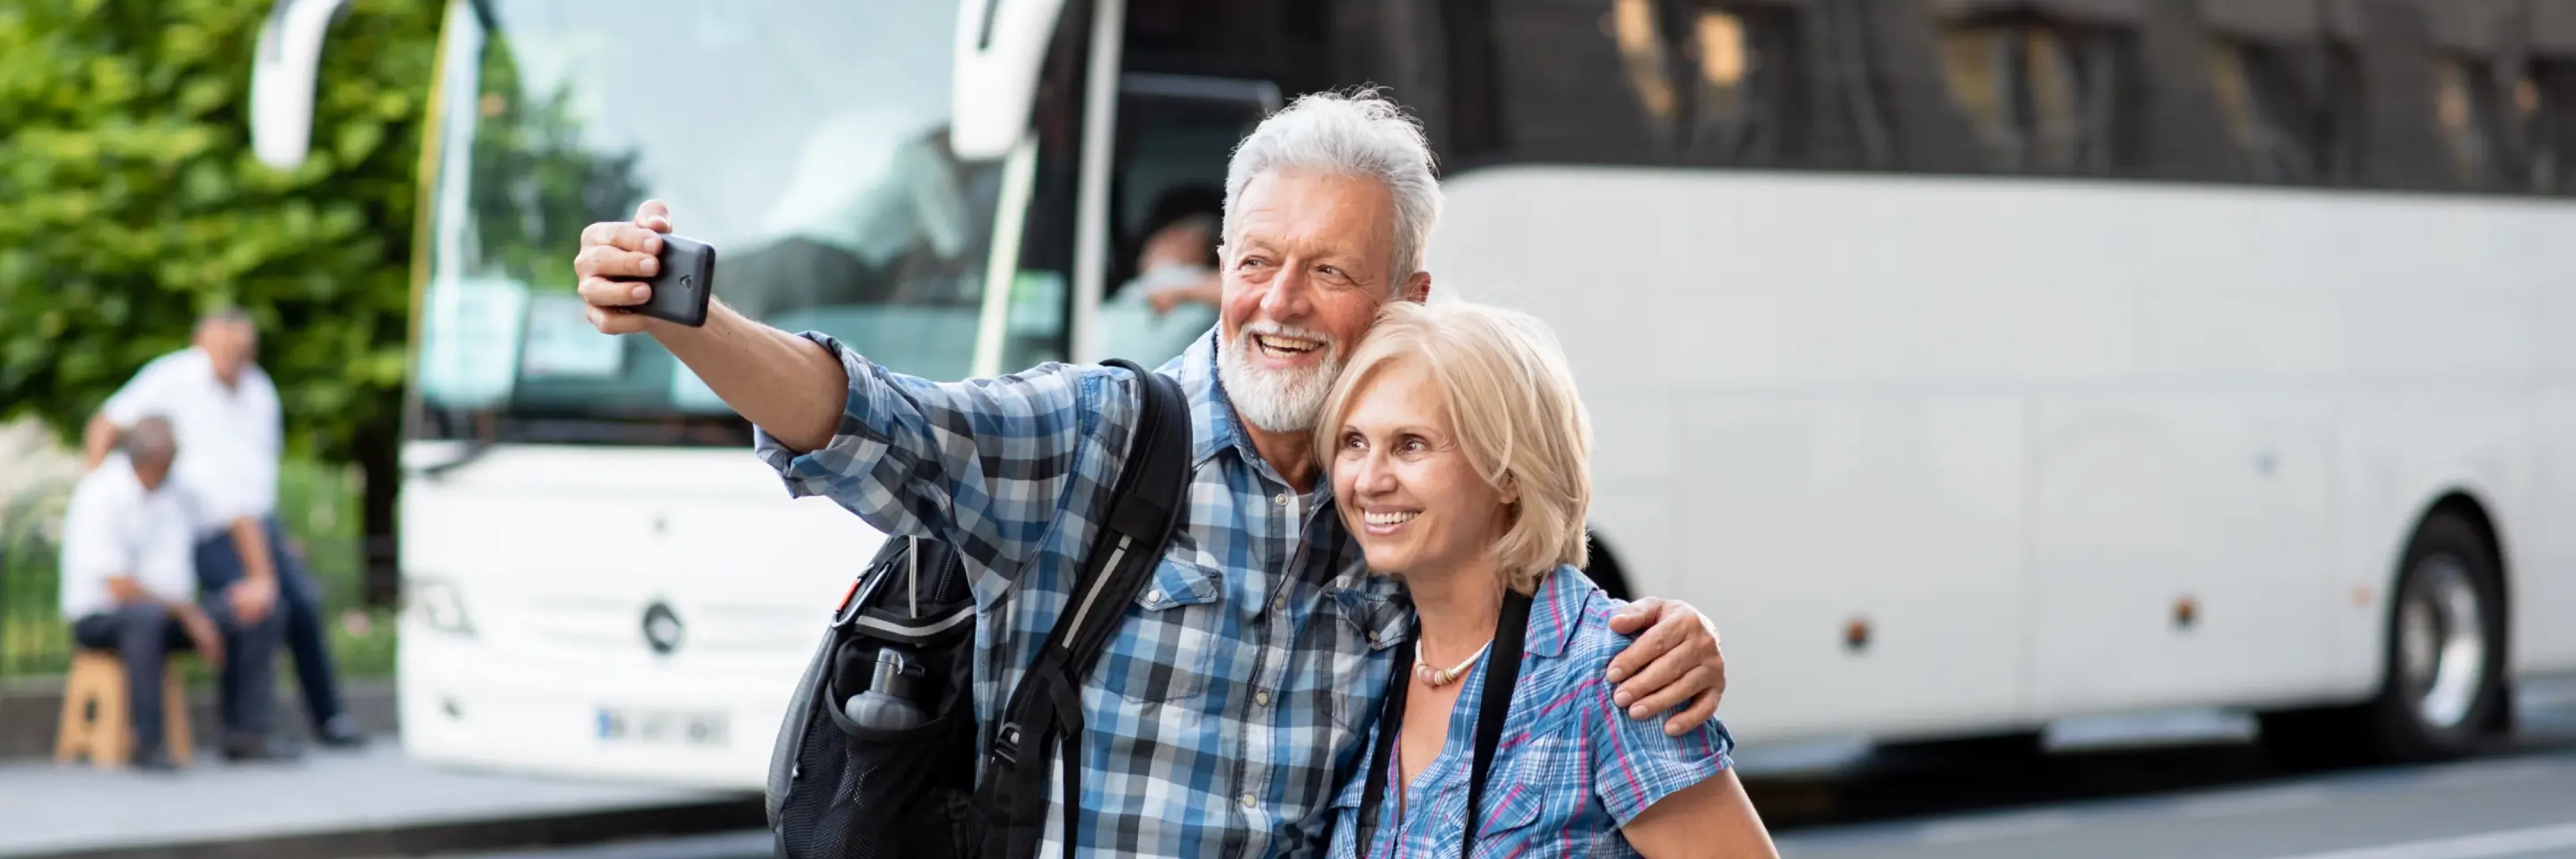 Bus Tour Groups Packages